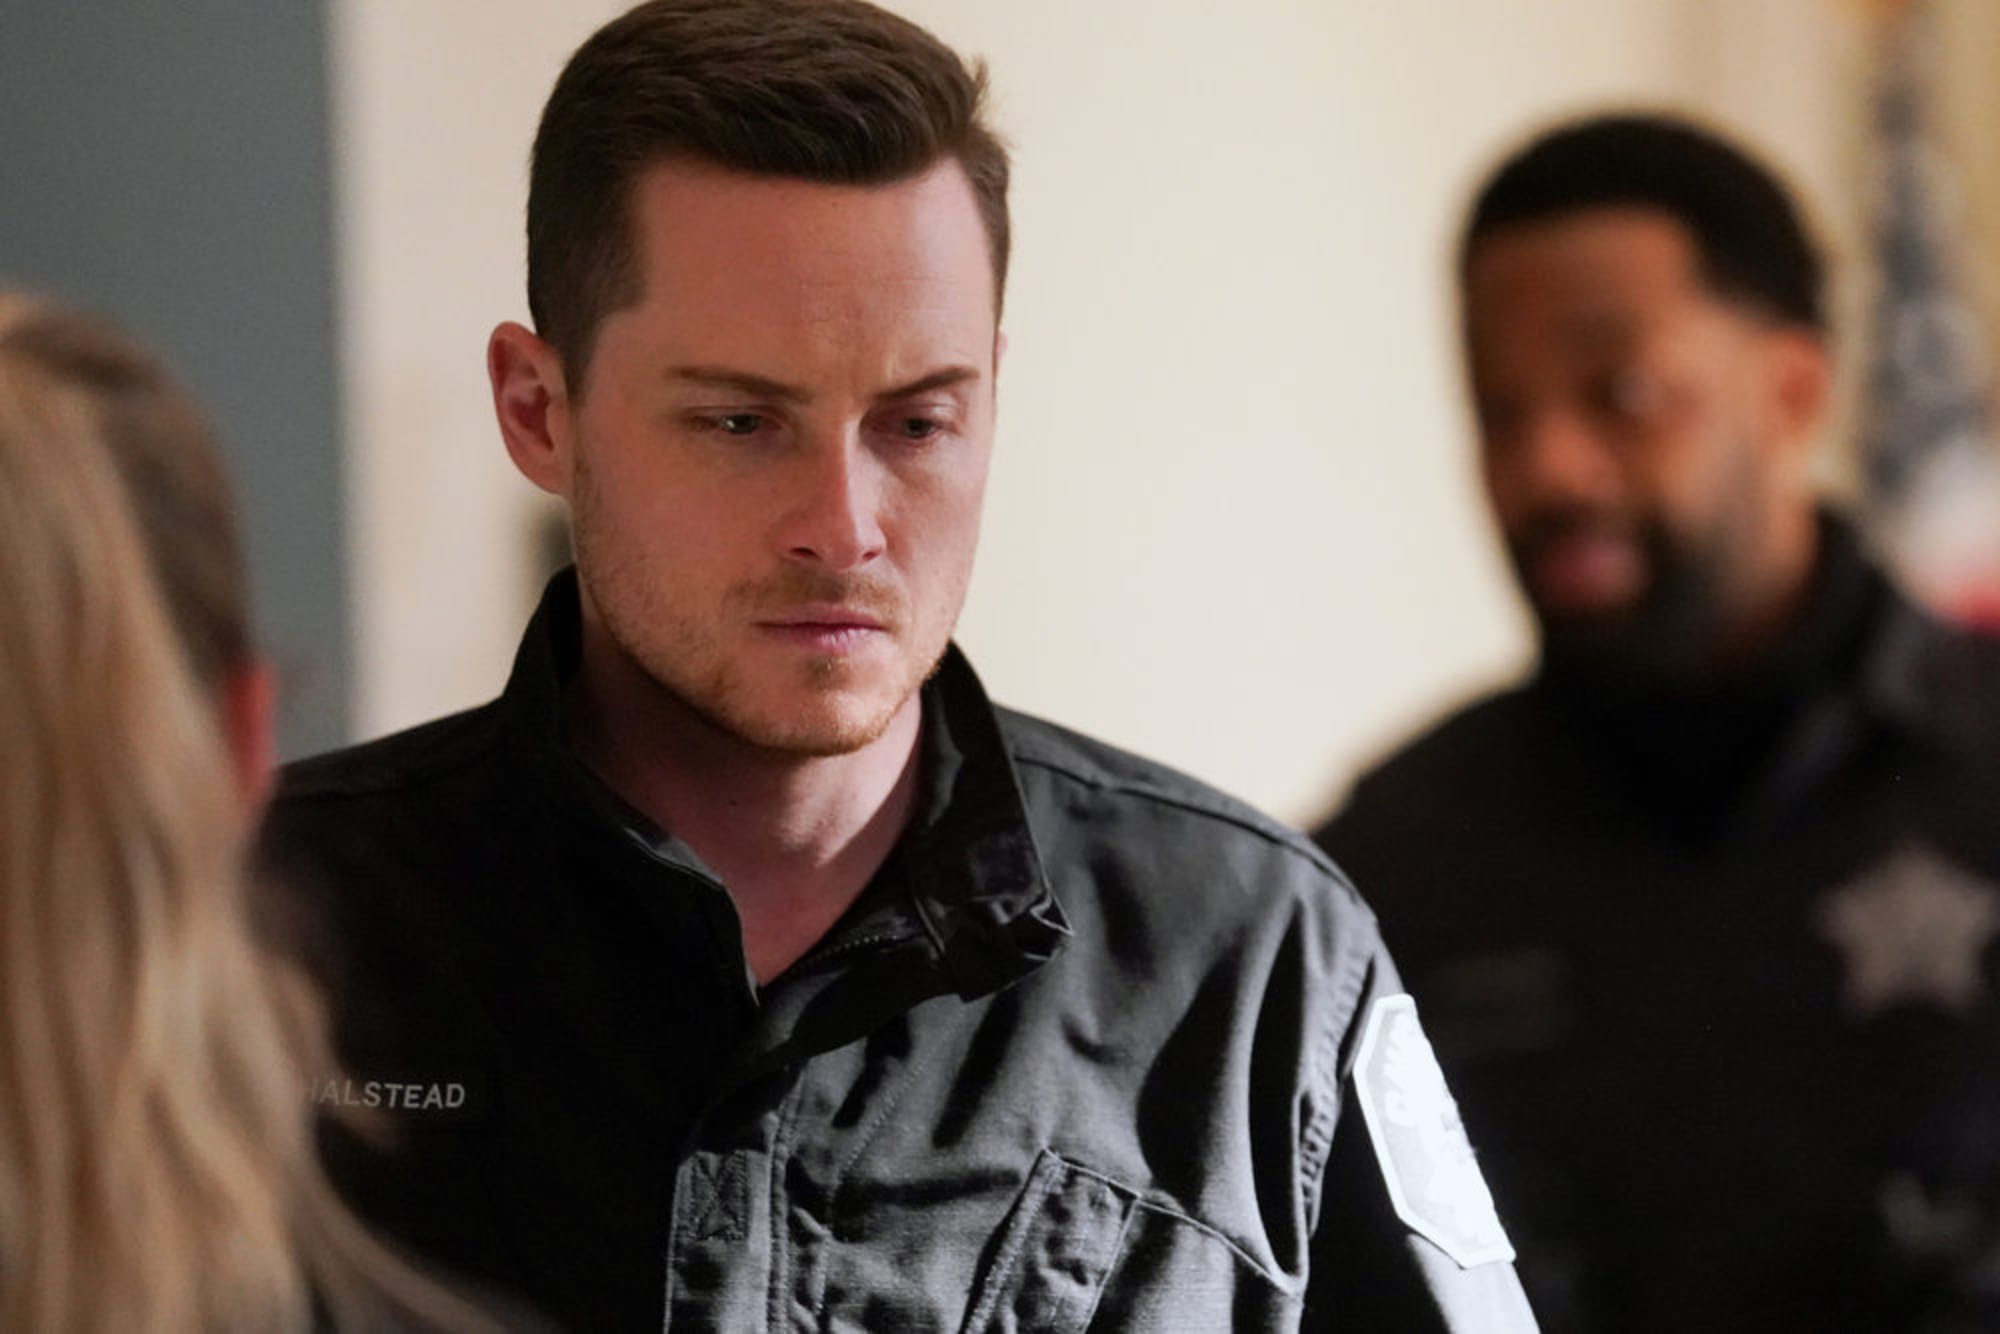 Is Jesse Lee Soffer leaving Chicago PD?